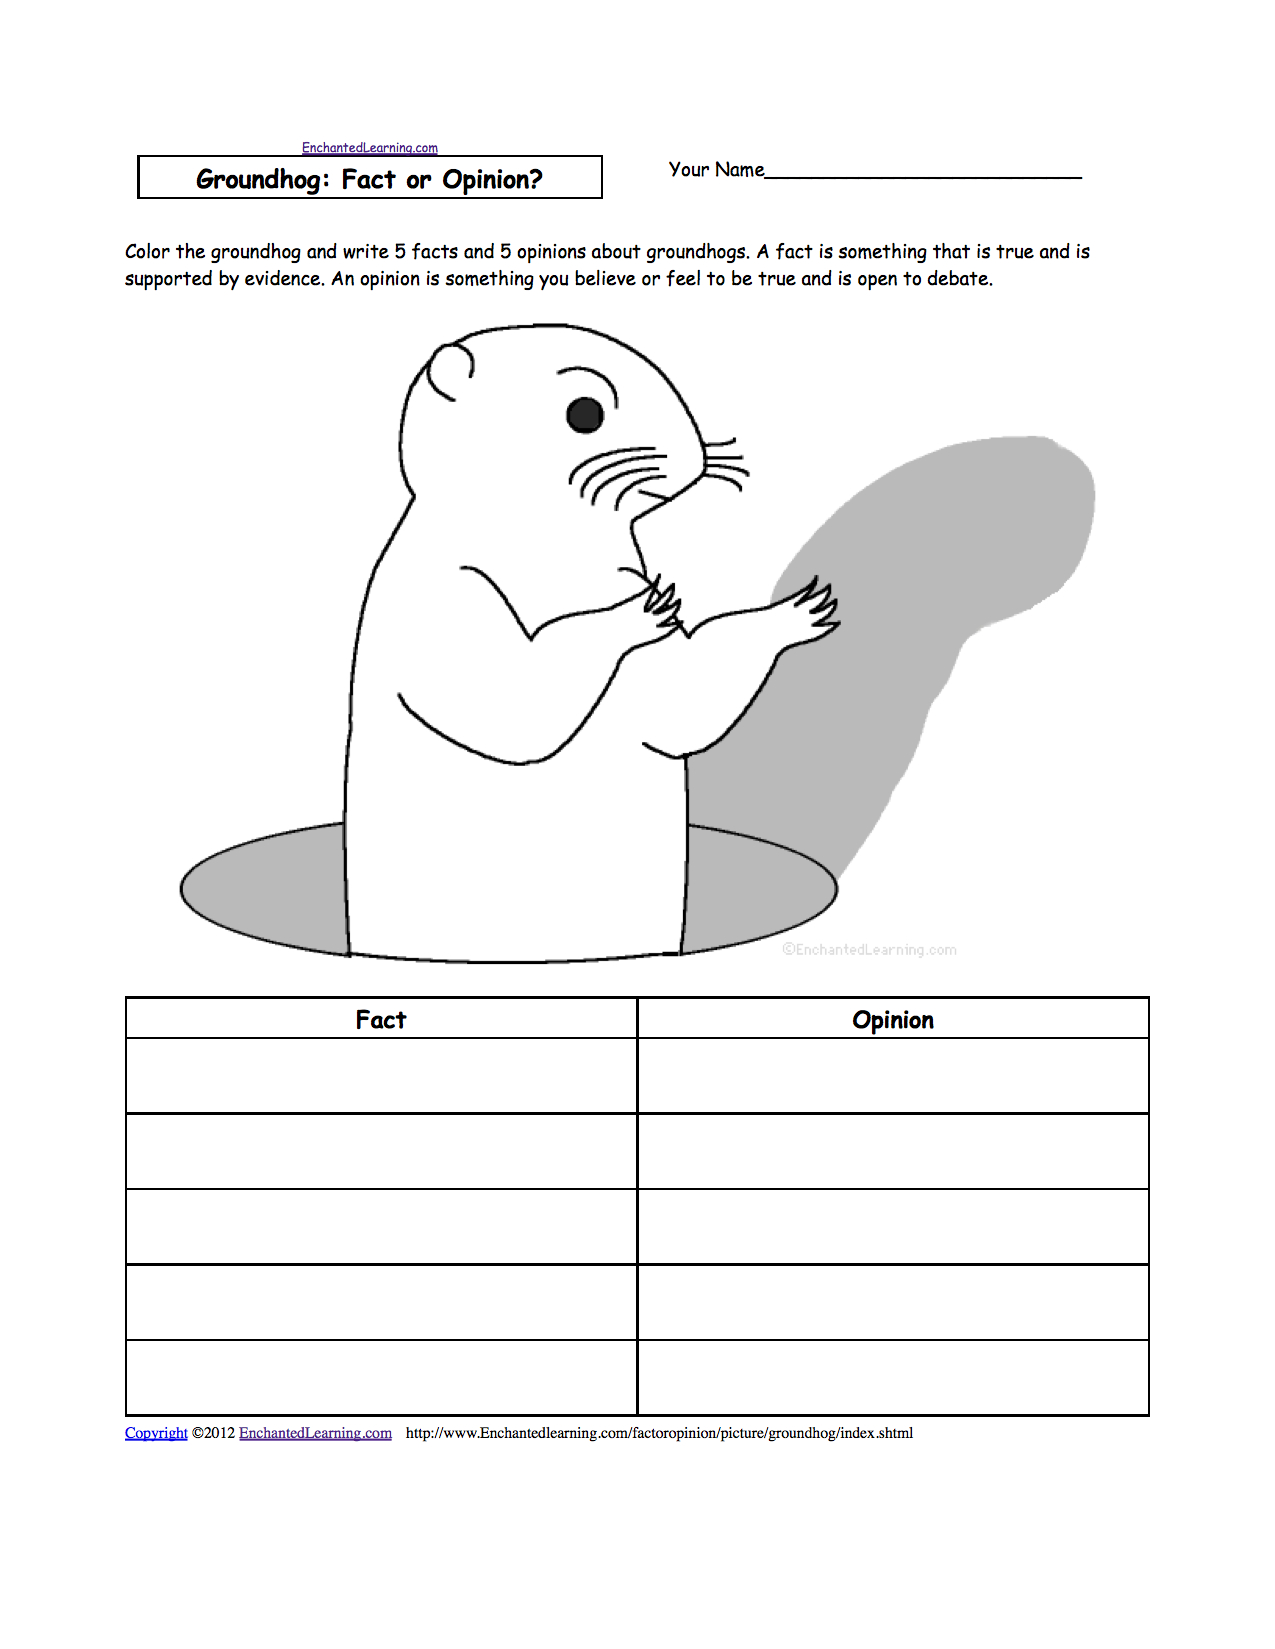 Groundhog Day Weather-Related Activities At Enchantedlearning - Free Printable Groundhog Day Reading Comprehension Worksheets